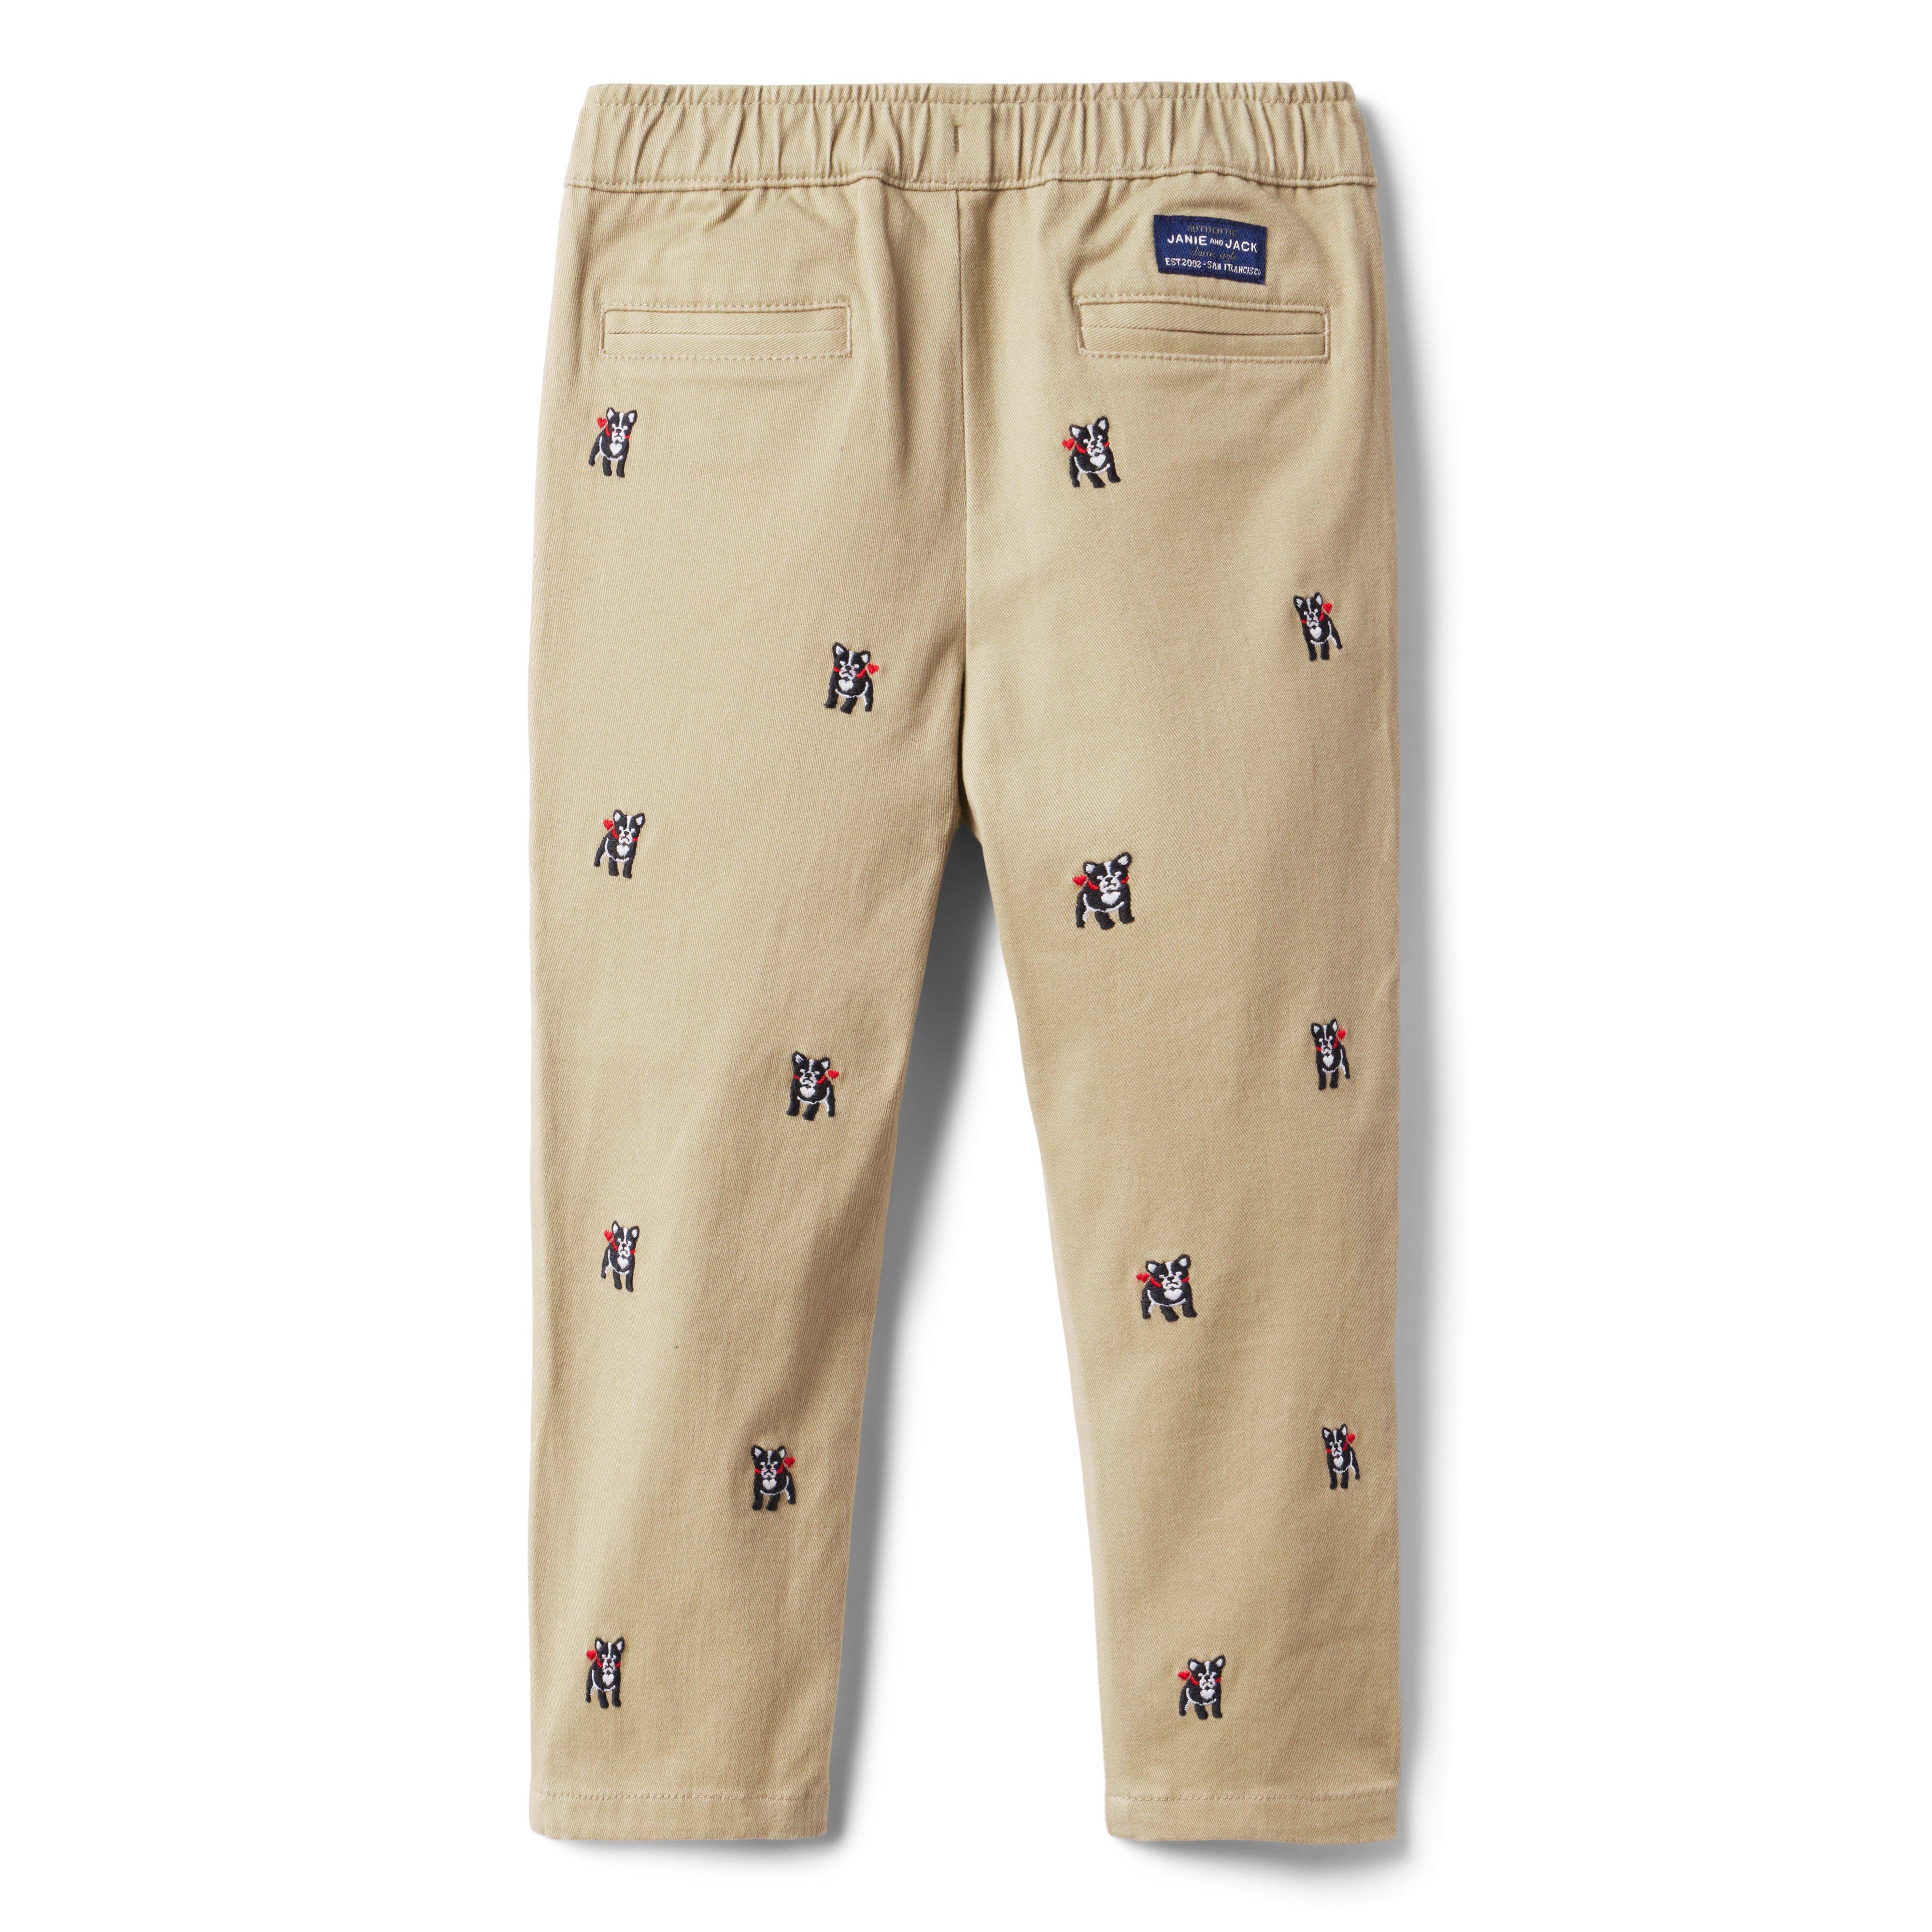 The Embroidered French Bulldog Pant